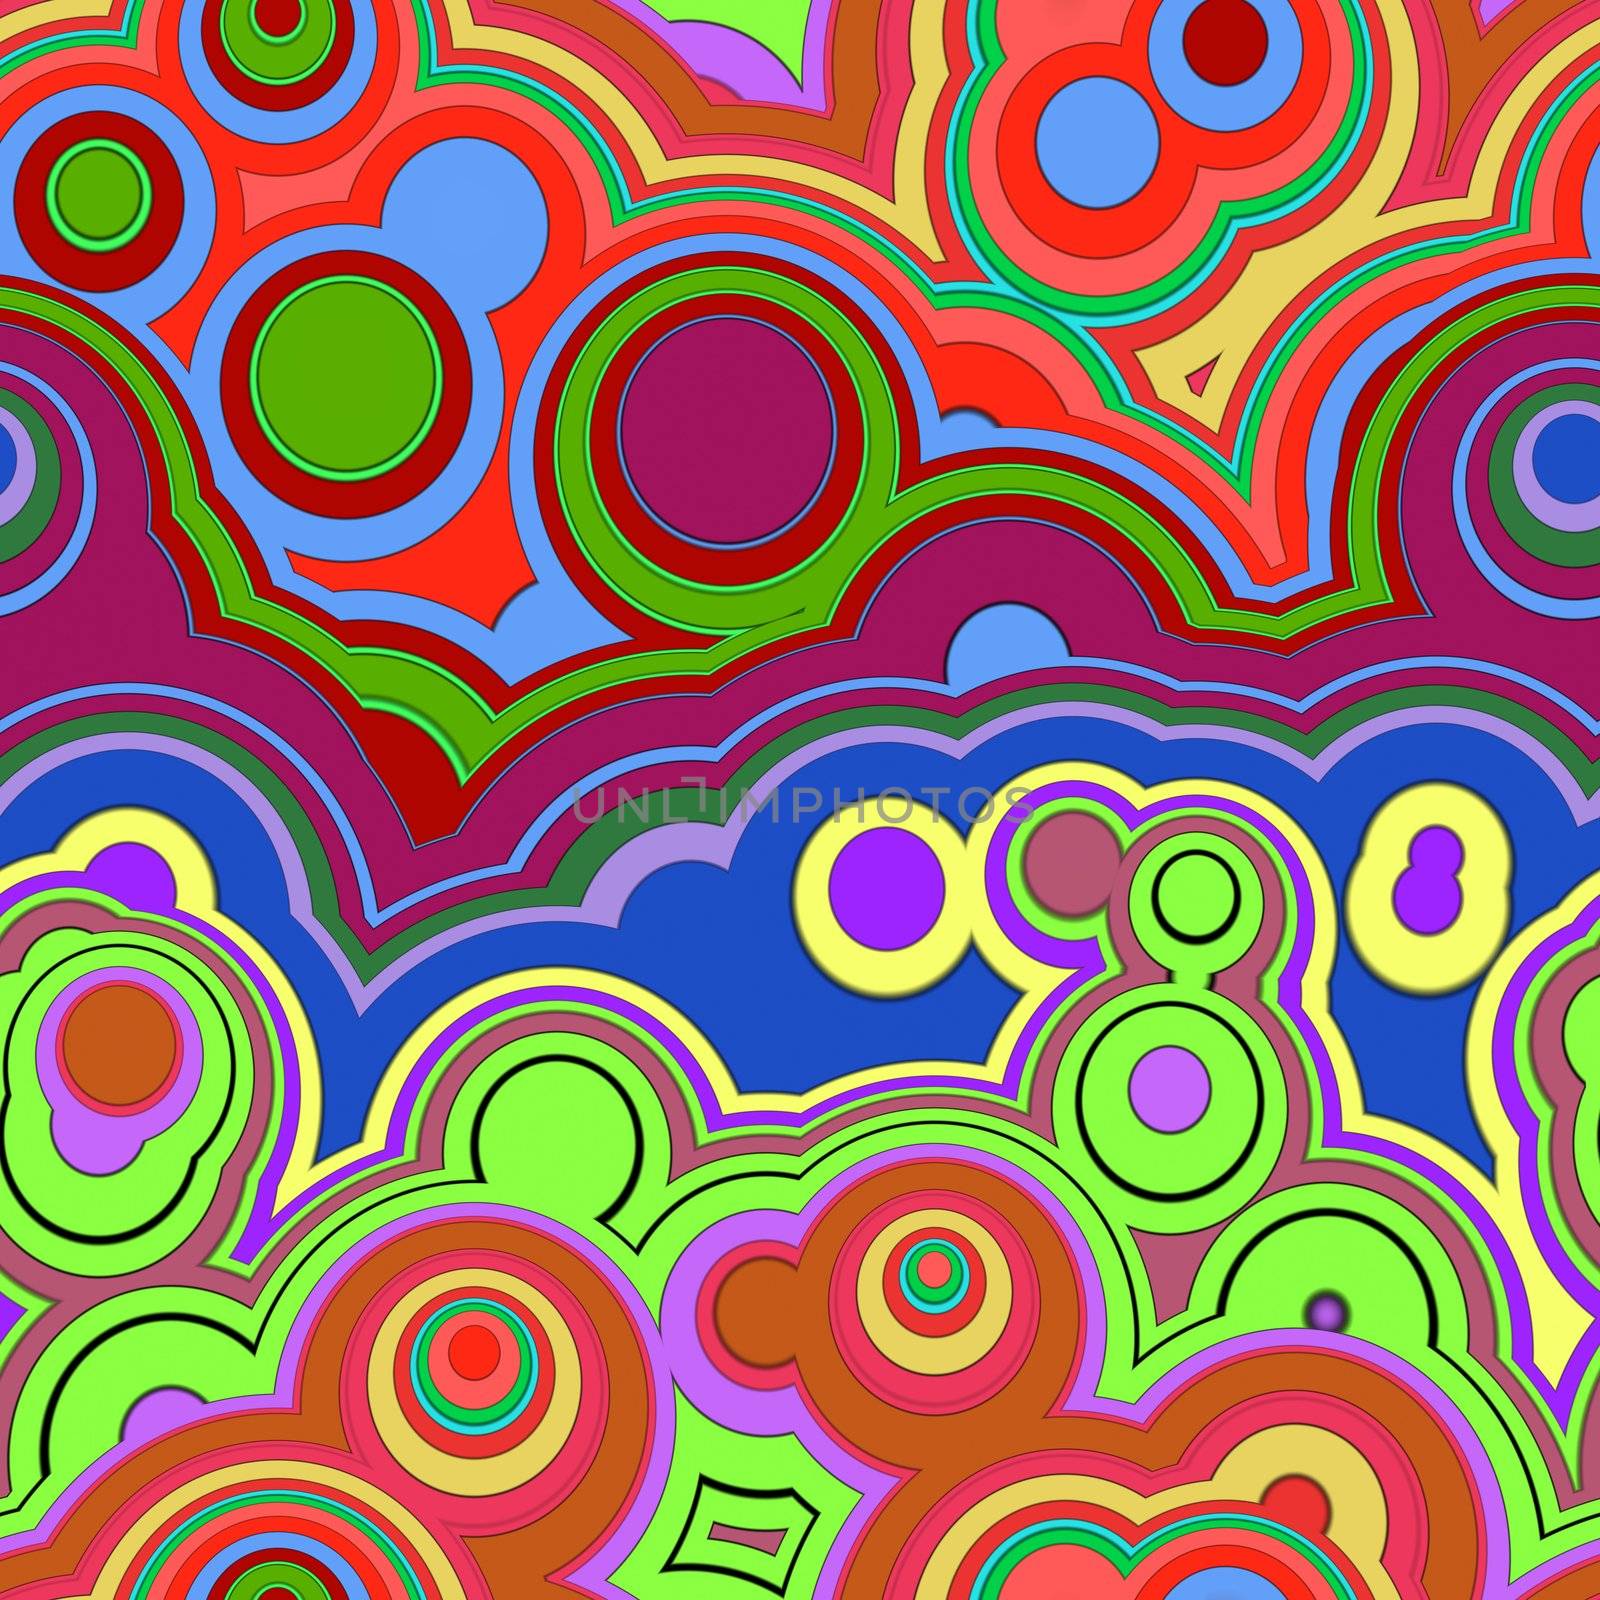 texture of abstract retro colored round shapes